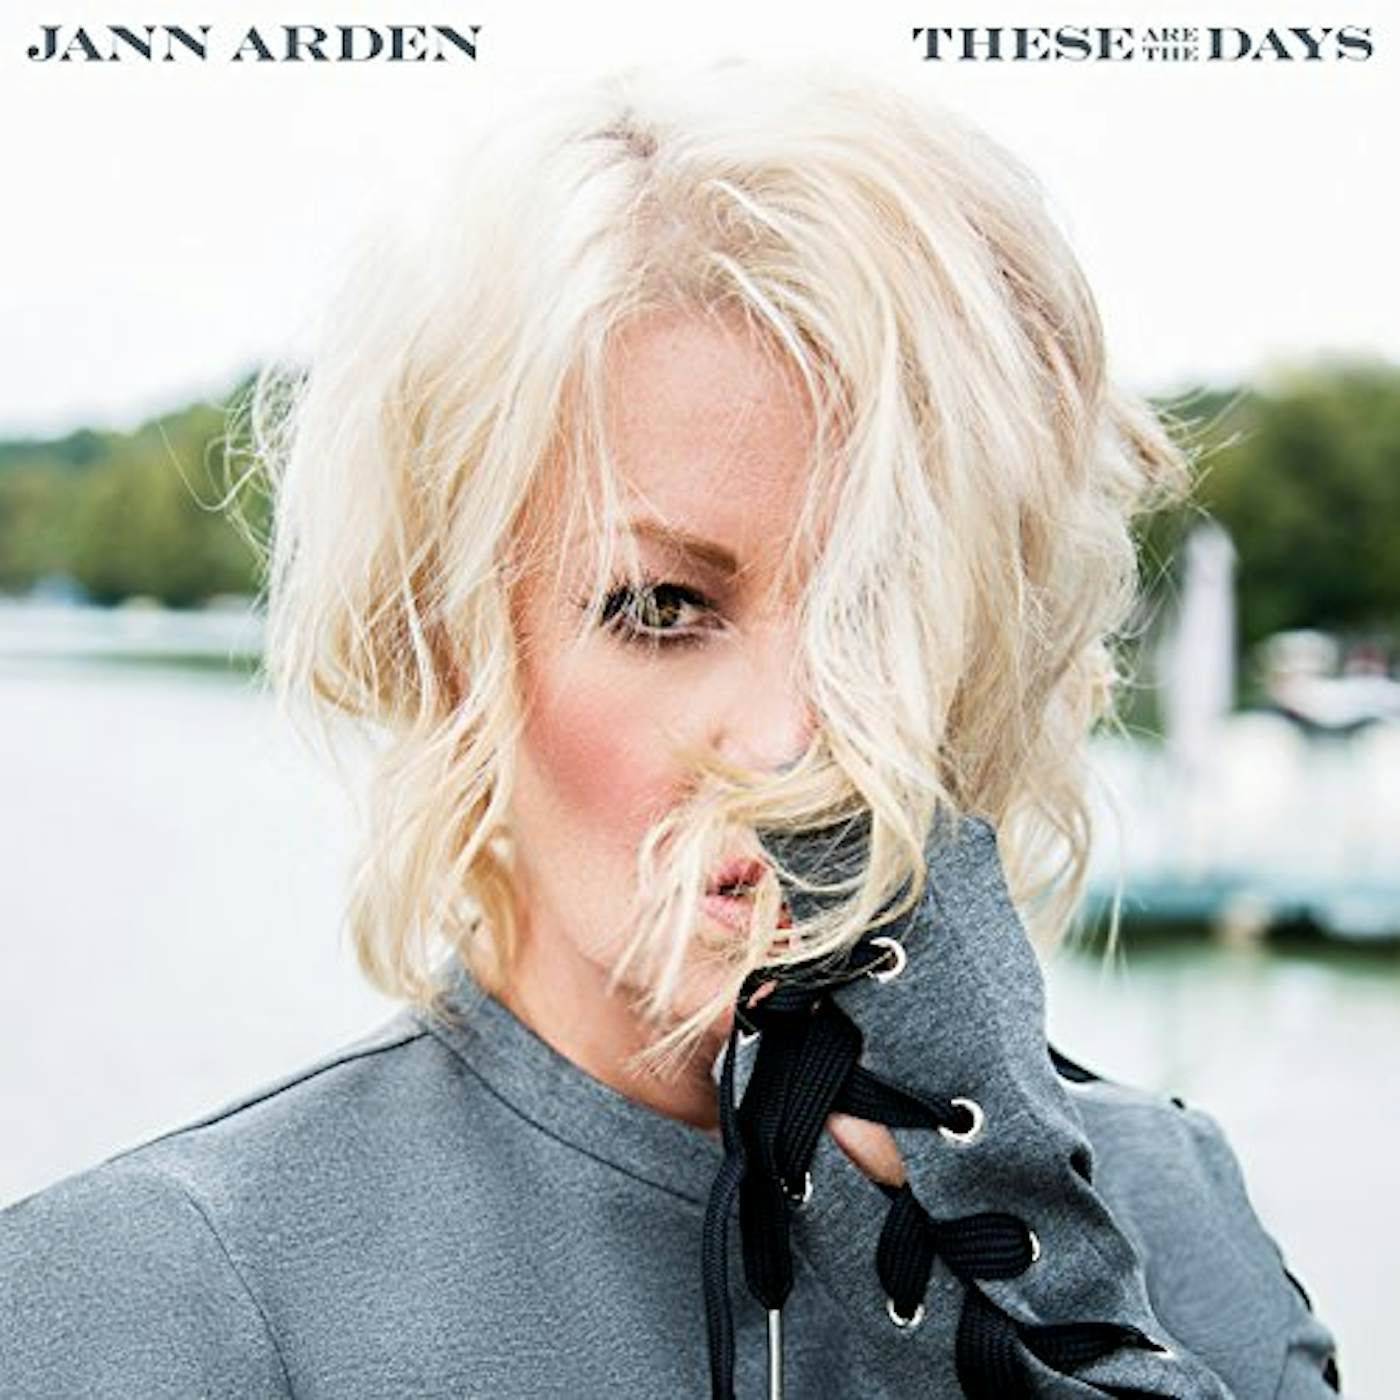 Jann Arden THESE ARE THE DAYS CD